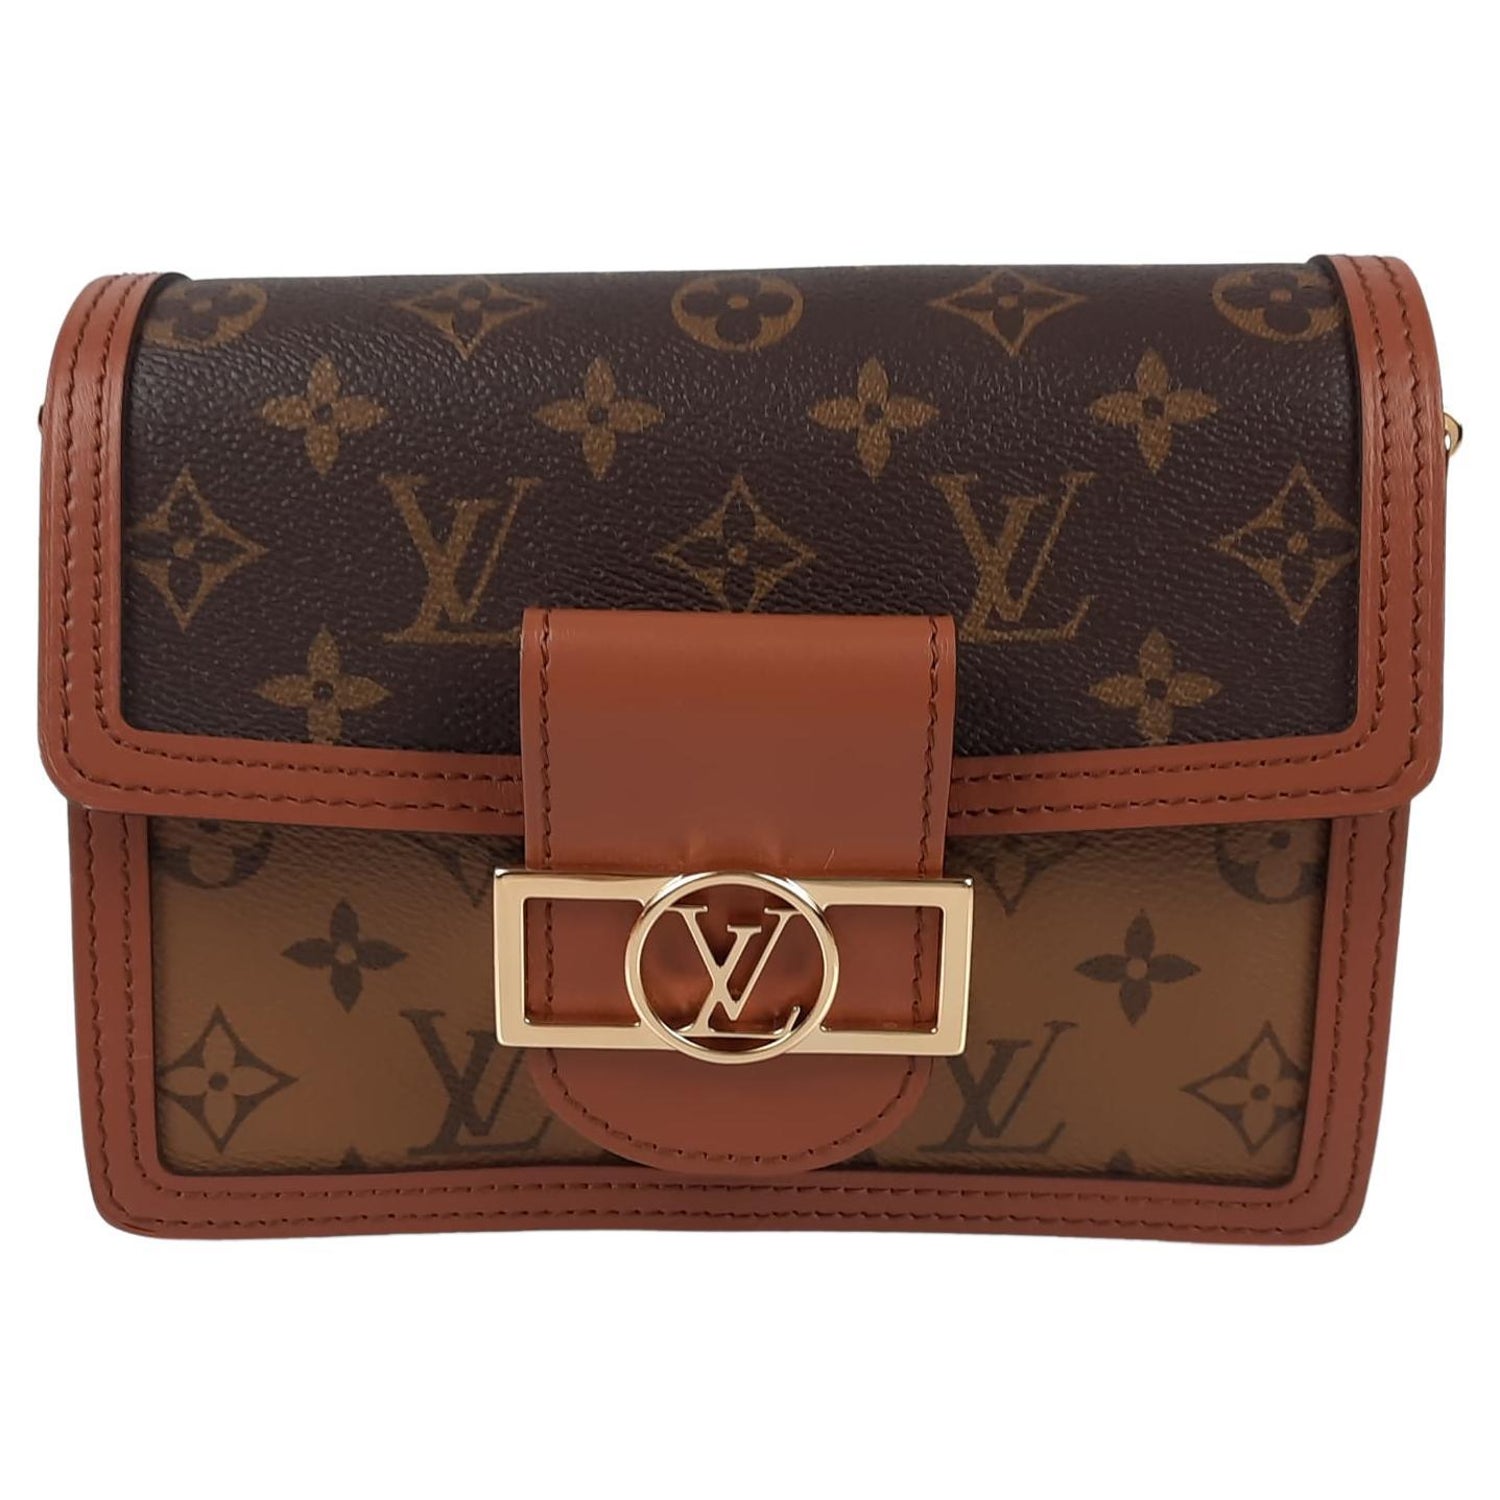 LOUIS VUITTON MINI DAUPHINE 1 YEAR UPDATE & REVIEW